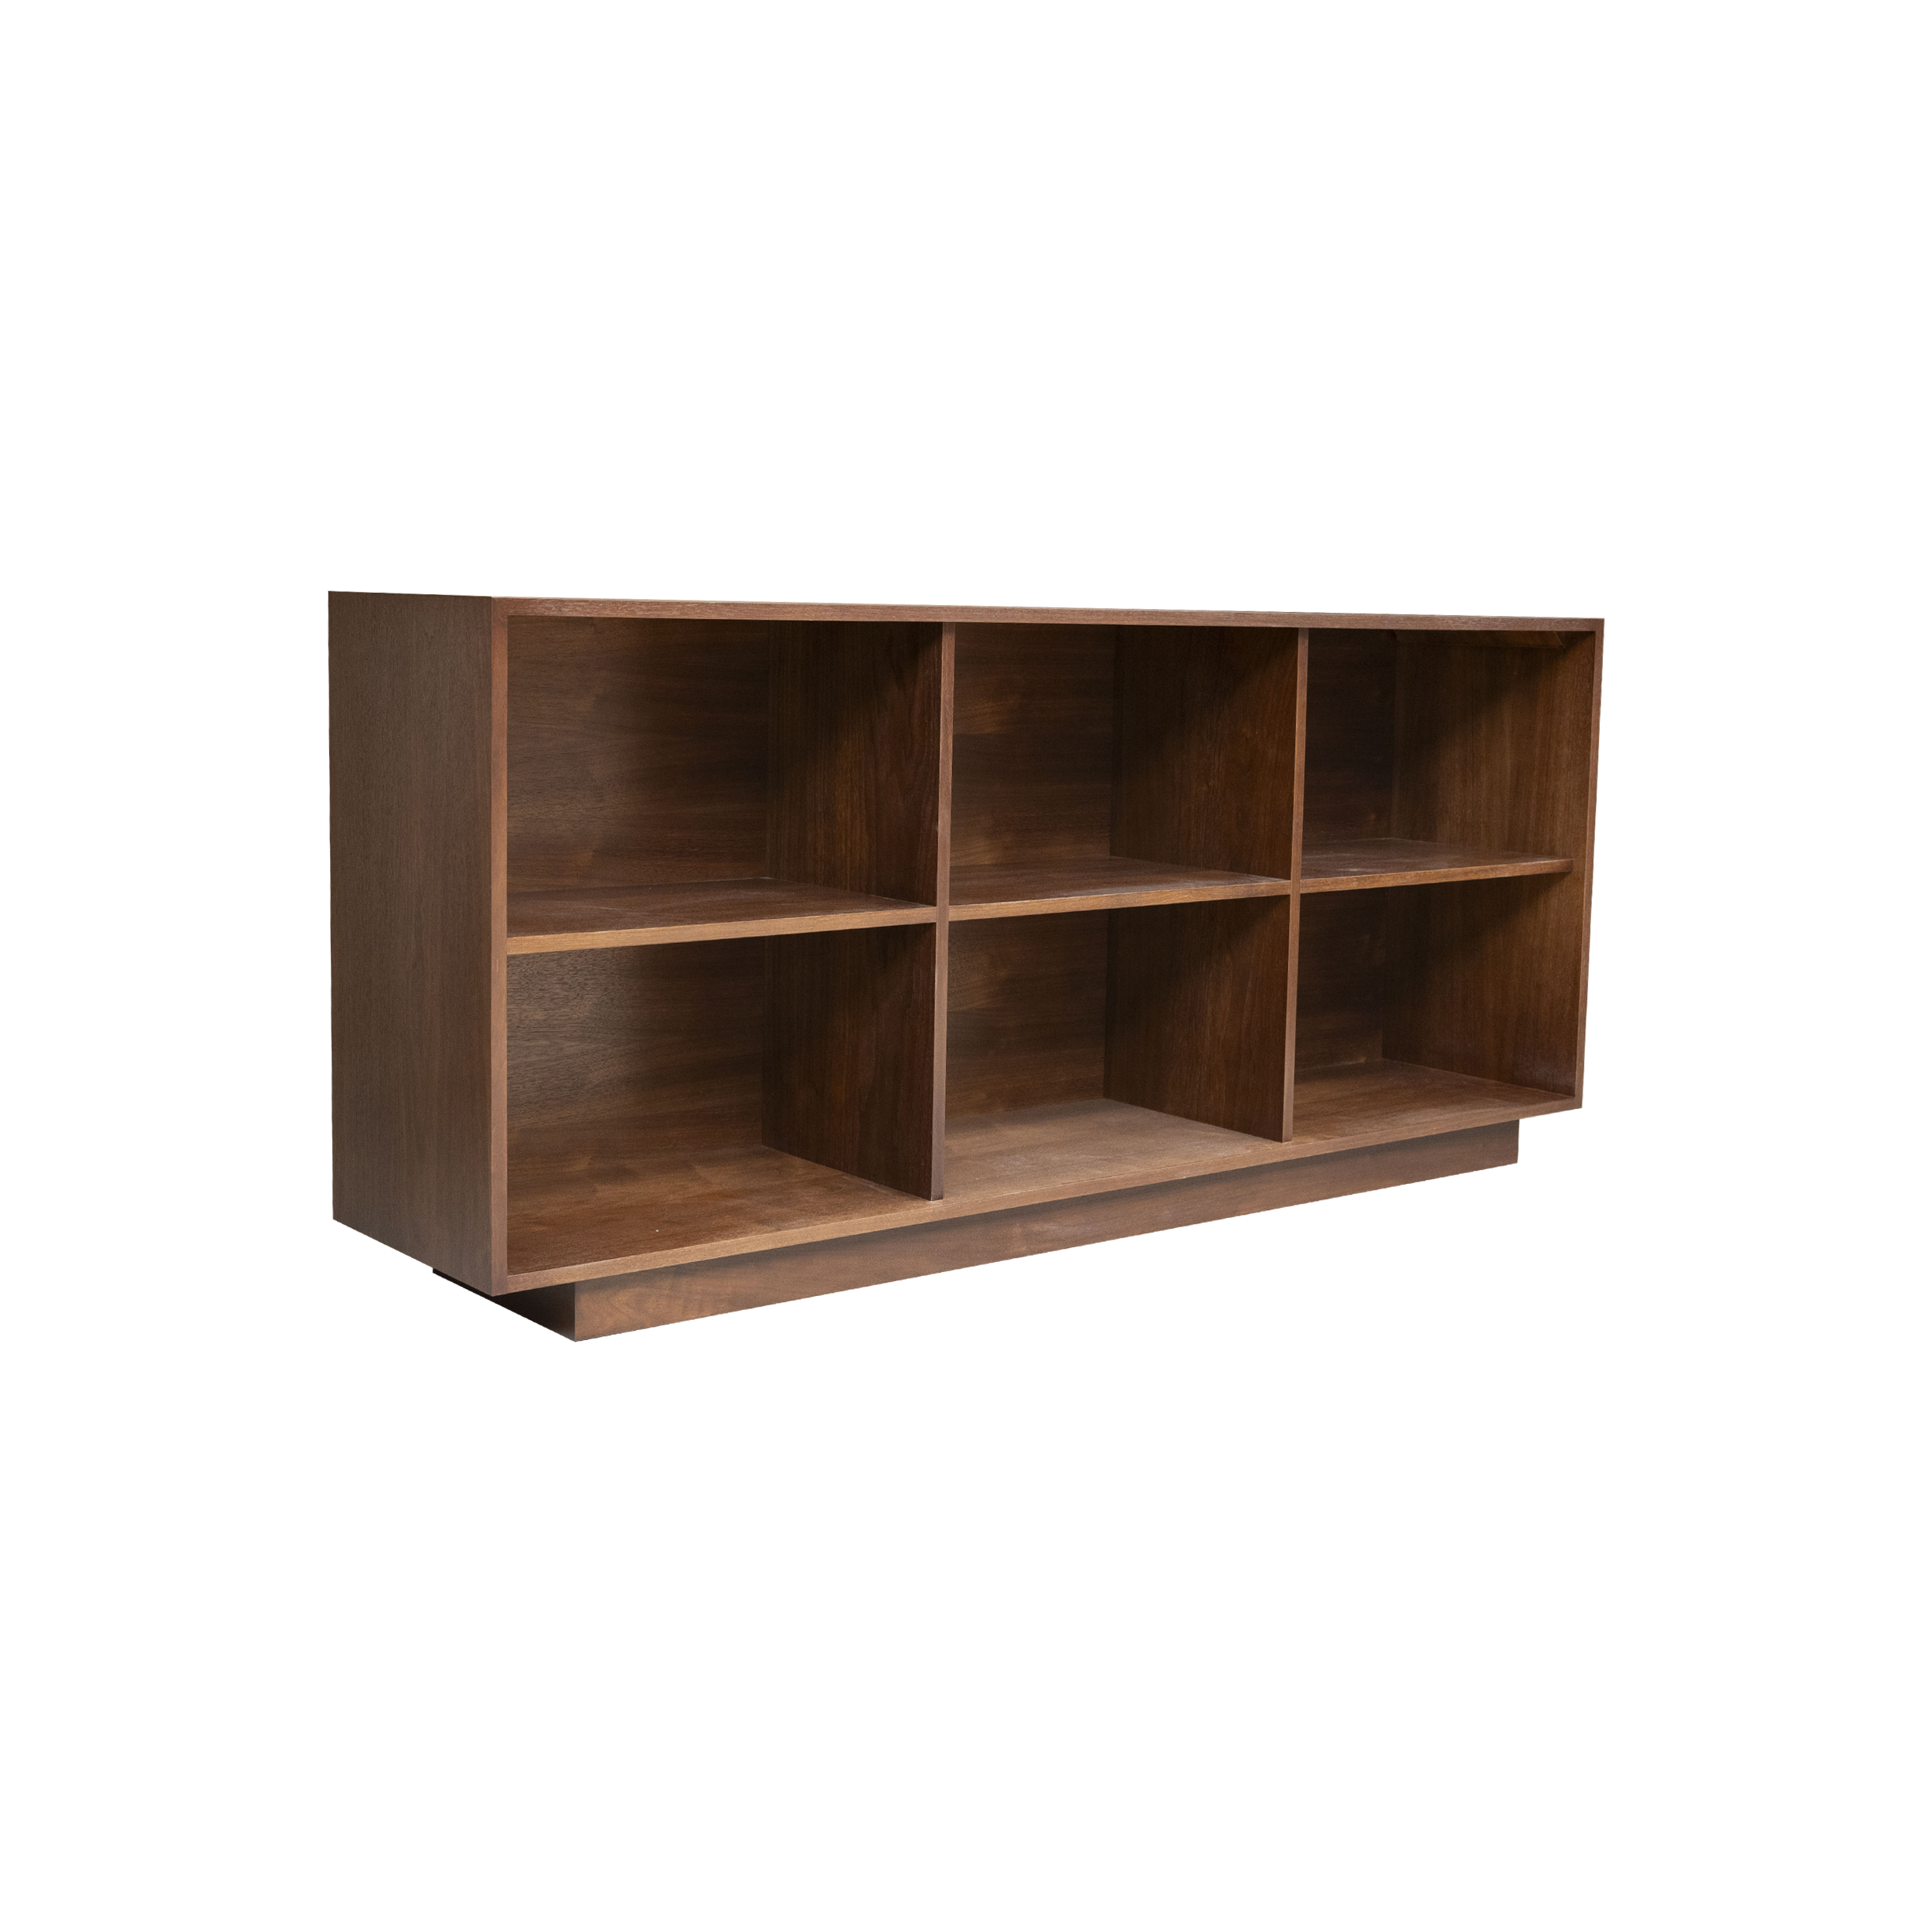 72" 2 x 3 Record Storage Cabinet with Plinth Base - Ready to Ship